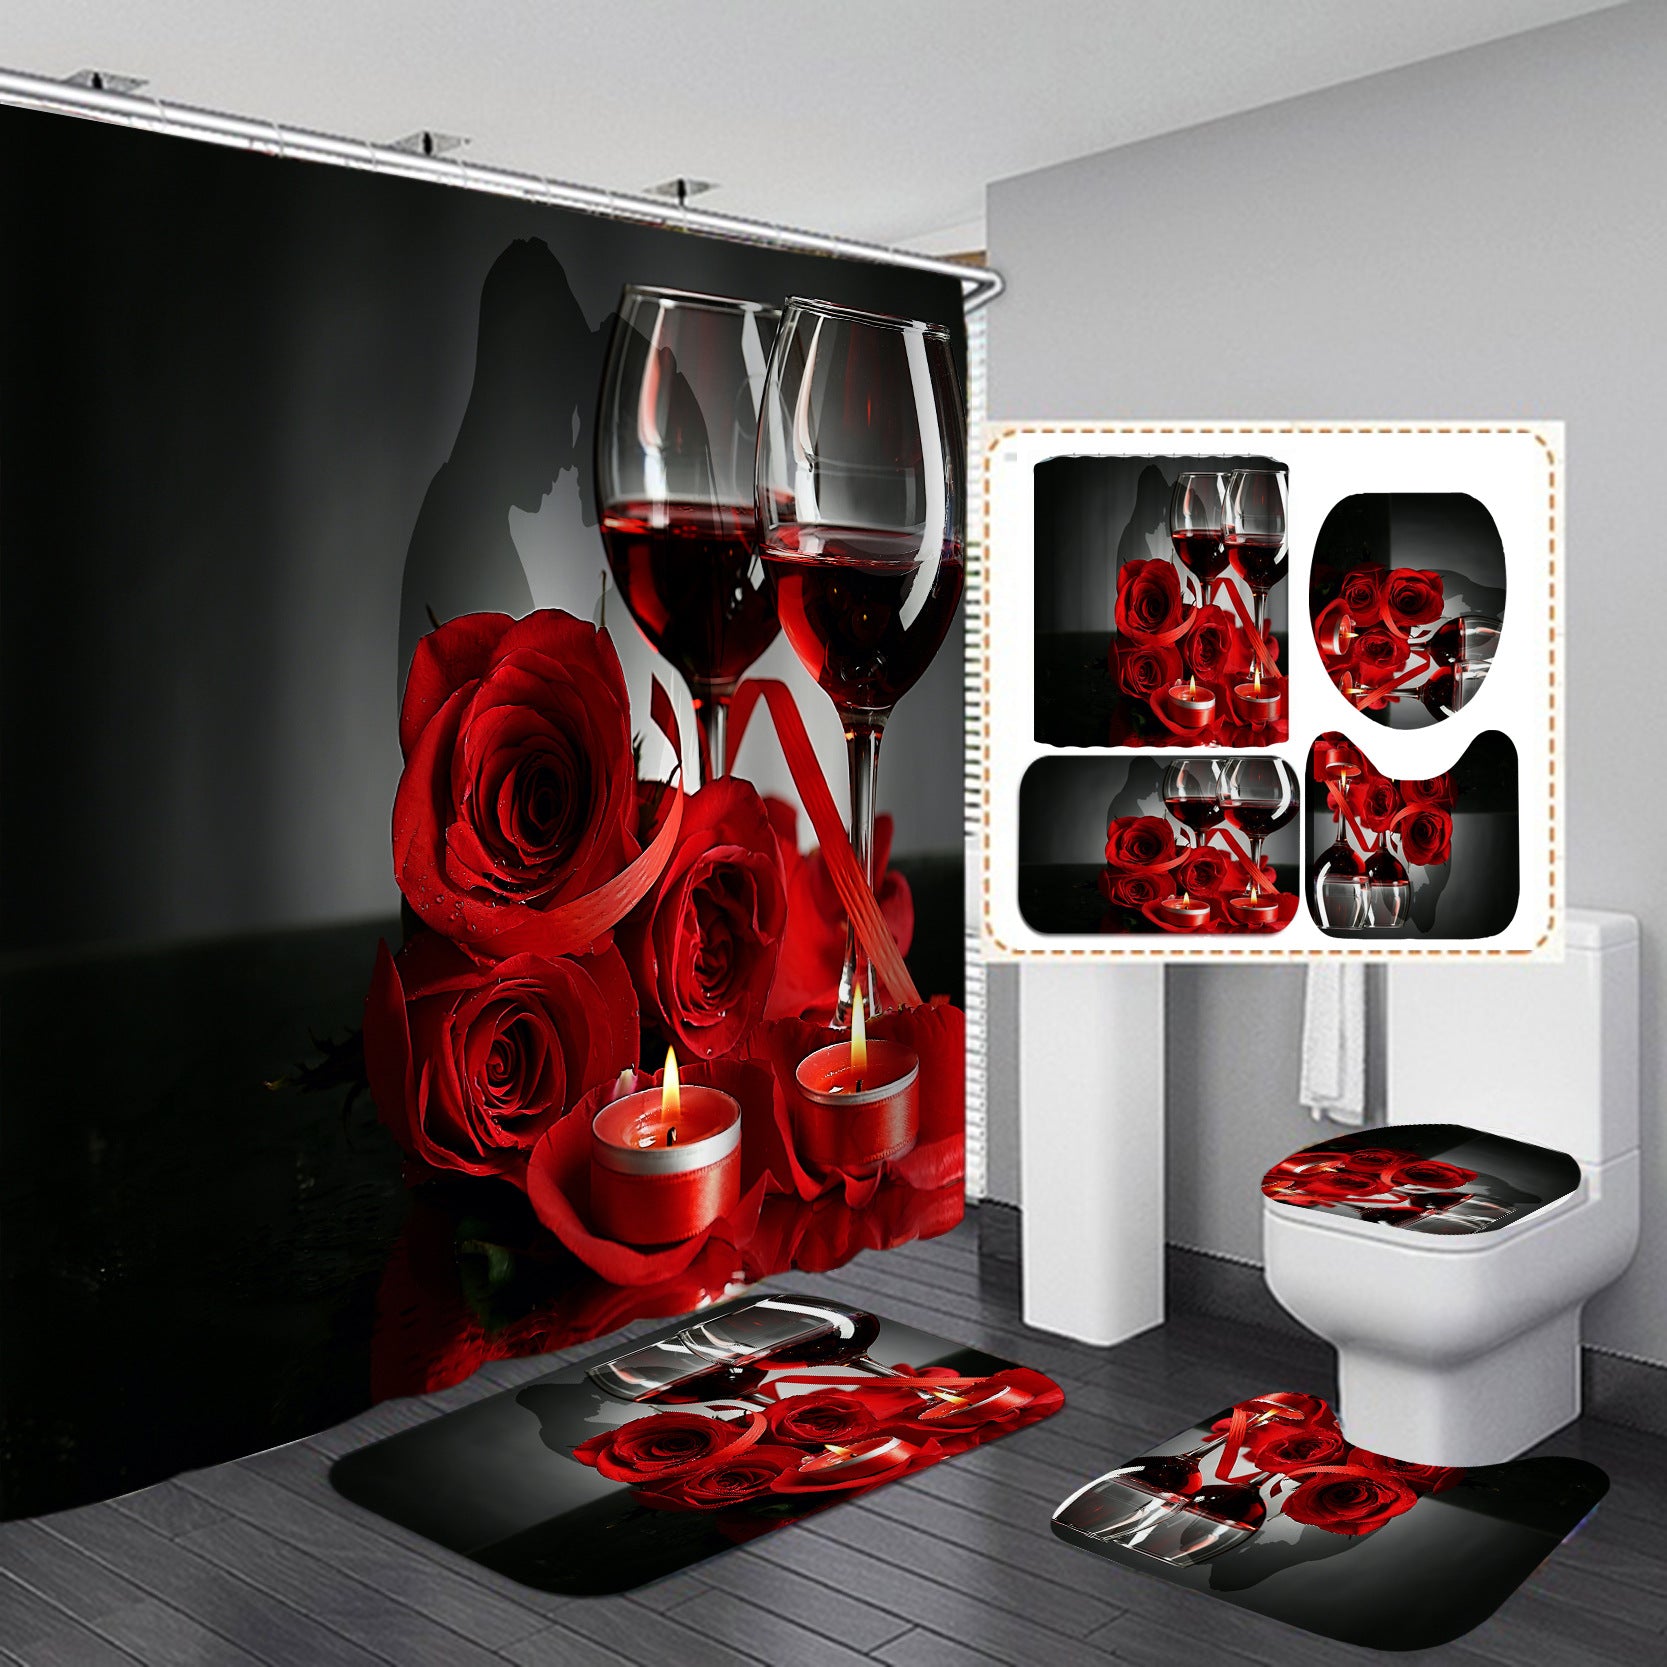 Valentine's Red Rose&Wine Glasses Bathroom Shower Curtain Sets-STYLEGOING